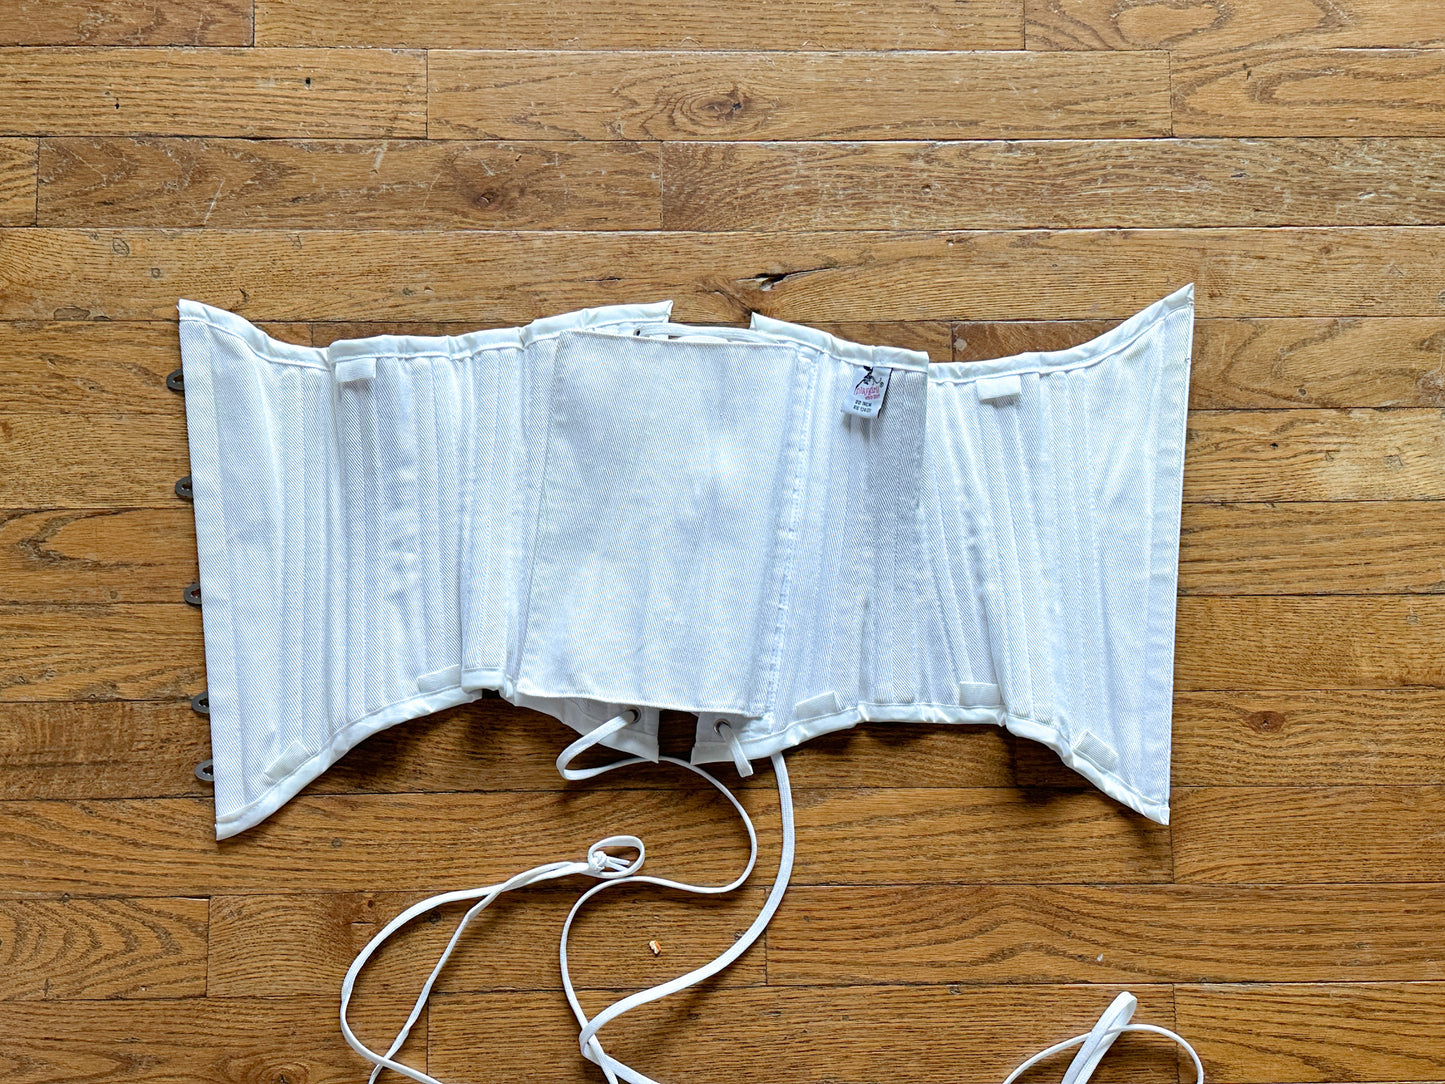 Playgirl White Label Corset| Corset with Metal Boning| Lace 22" Corset